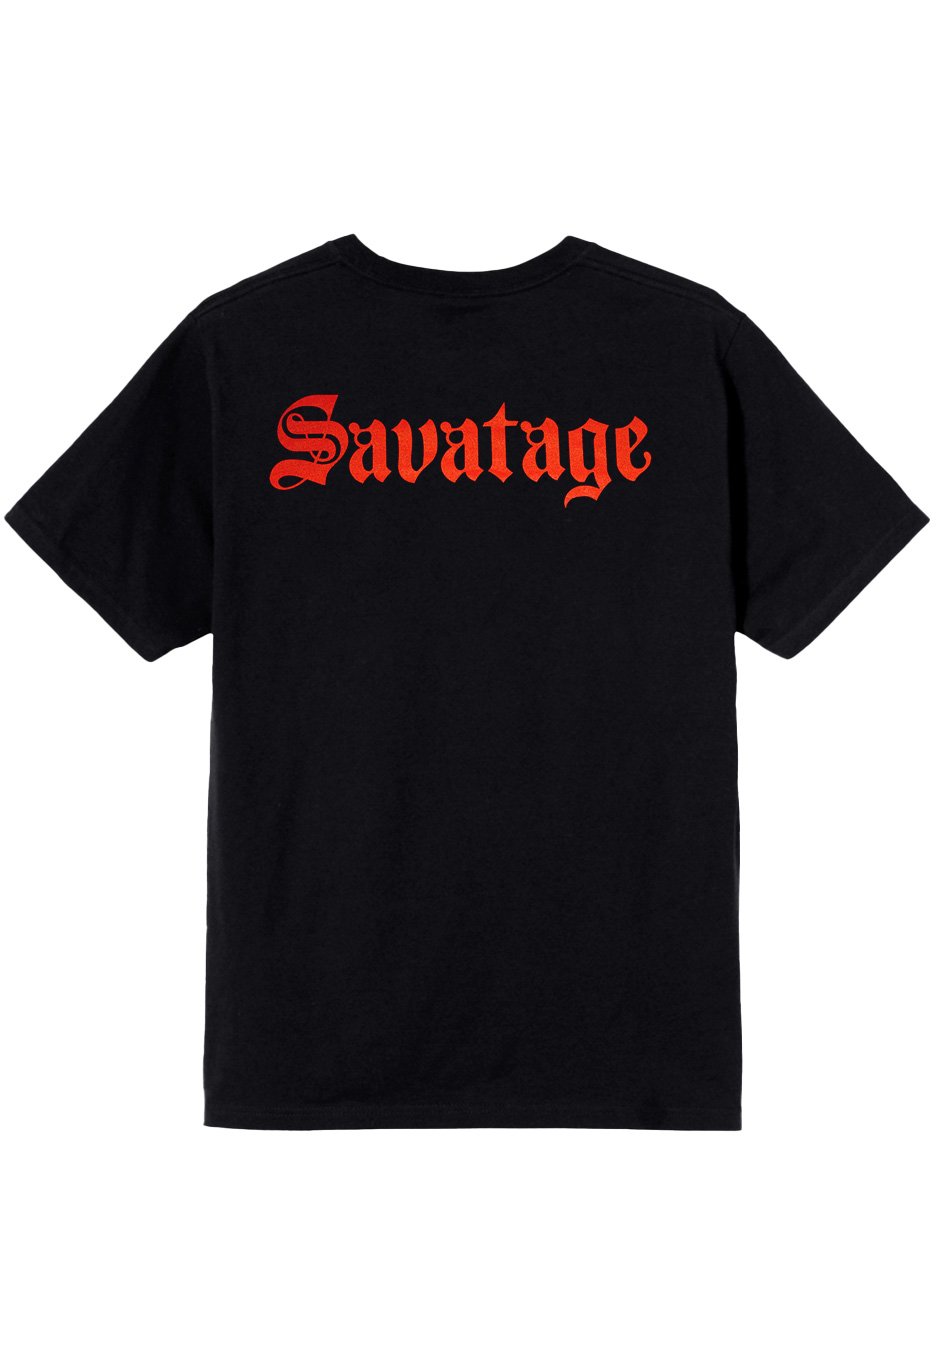 Savatage - The Dungeons Are Calling - T-Shirt